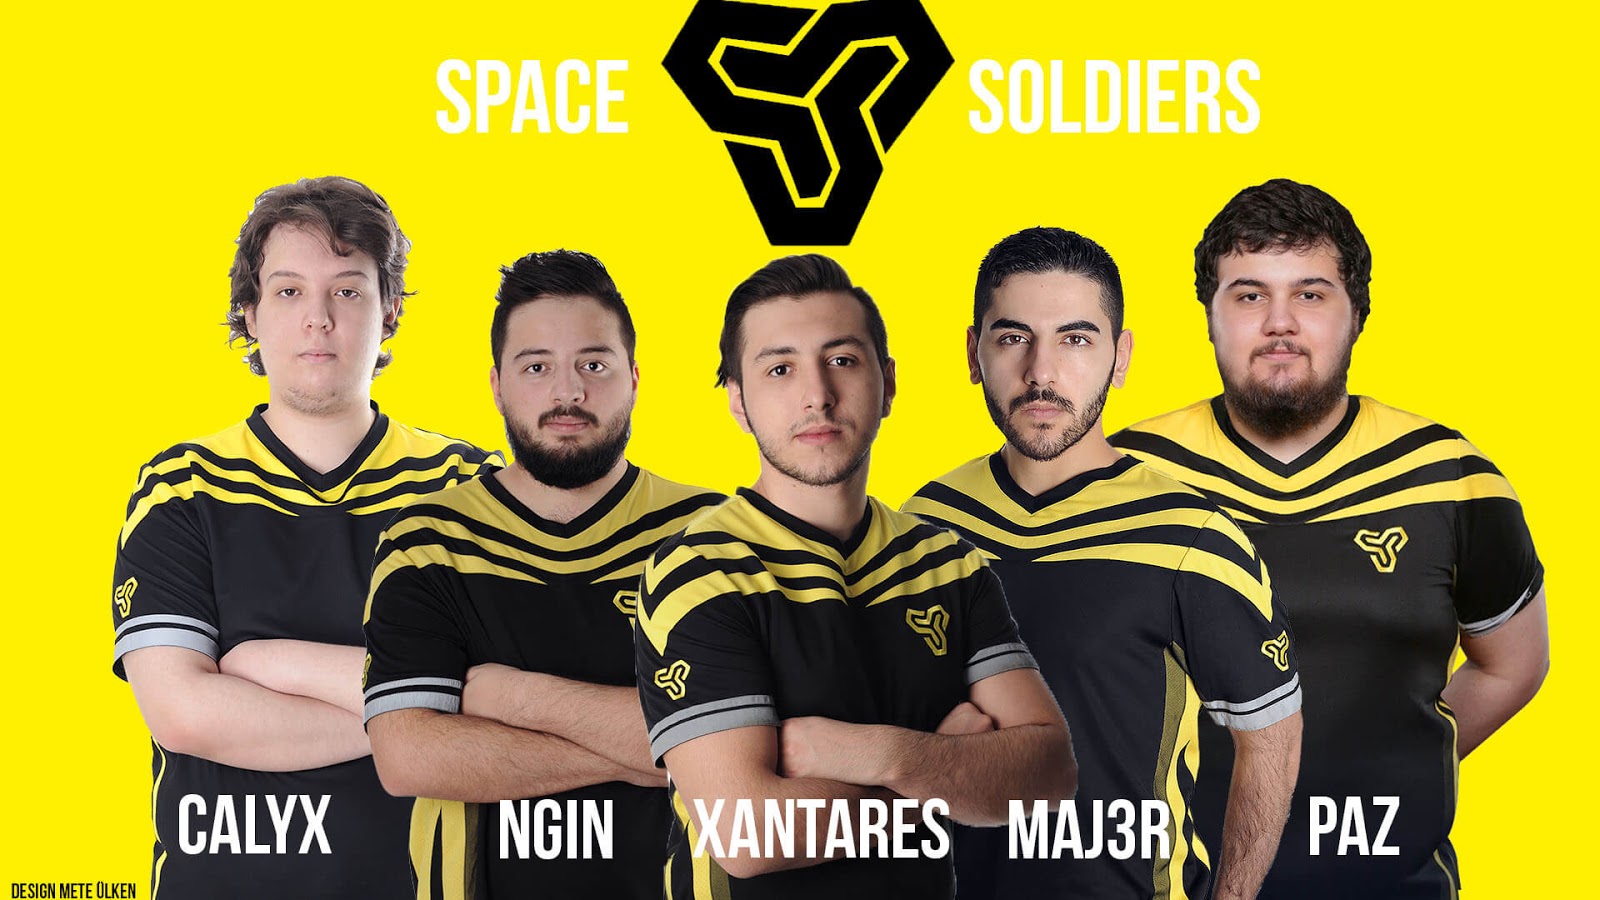 Sol space. Space Soldiers. Спейс солдерс КС го. Space Soldiers логотип. XANTARES аватарка.